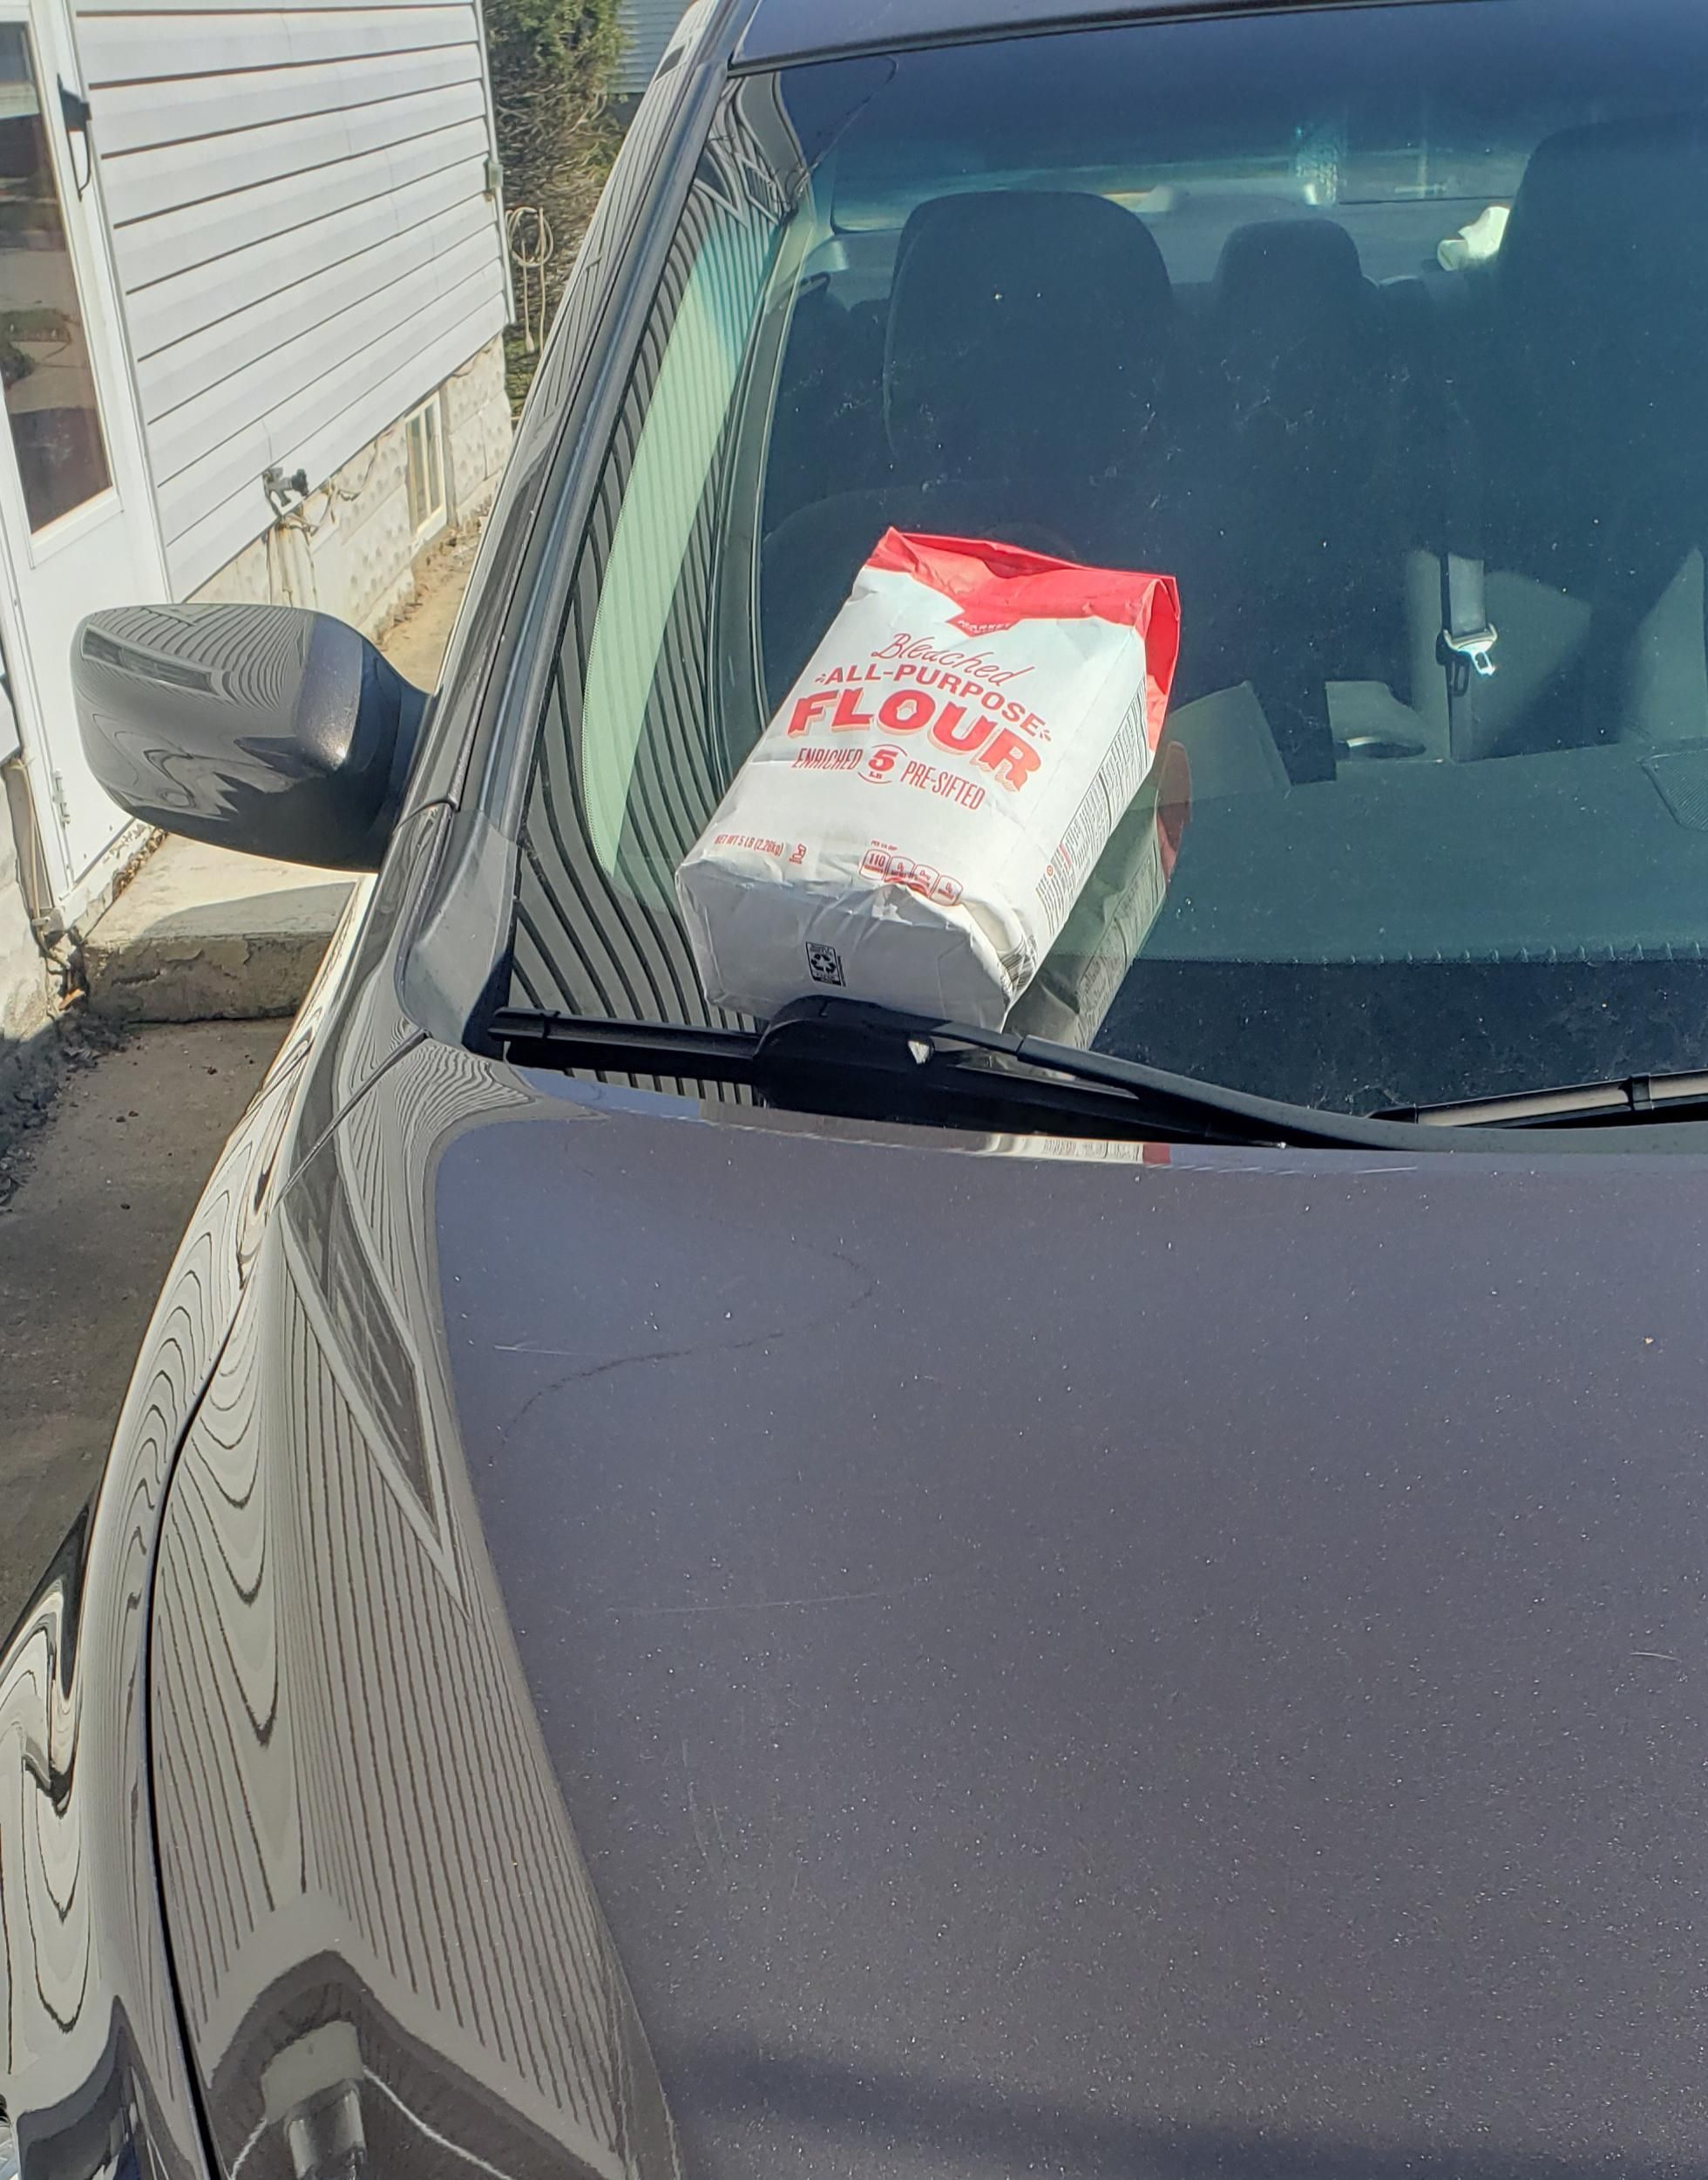 I think I have a secret admirer. They left a flour on my car this morning.